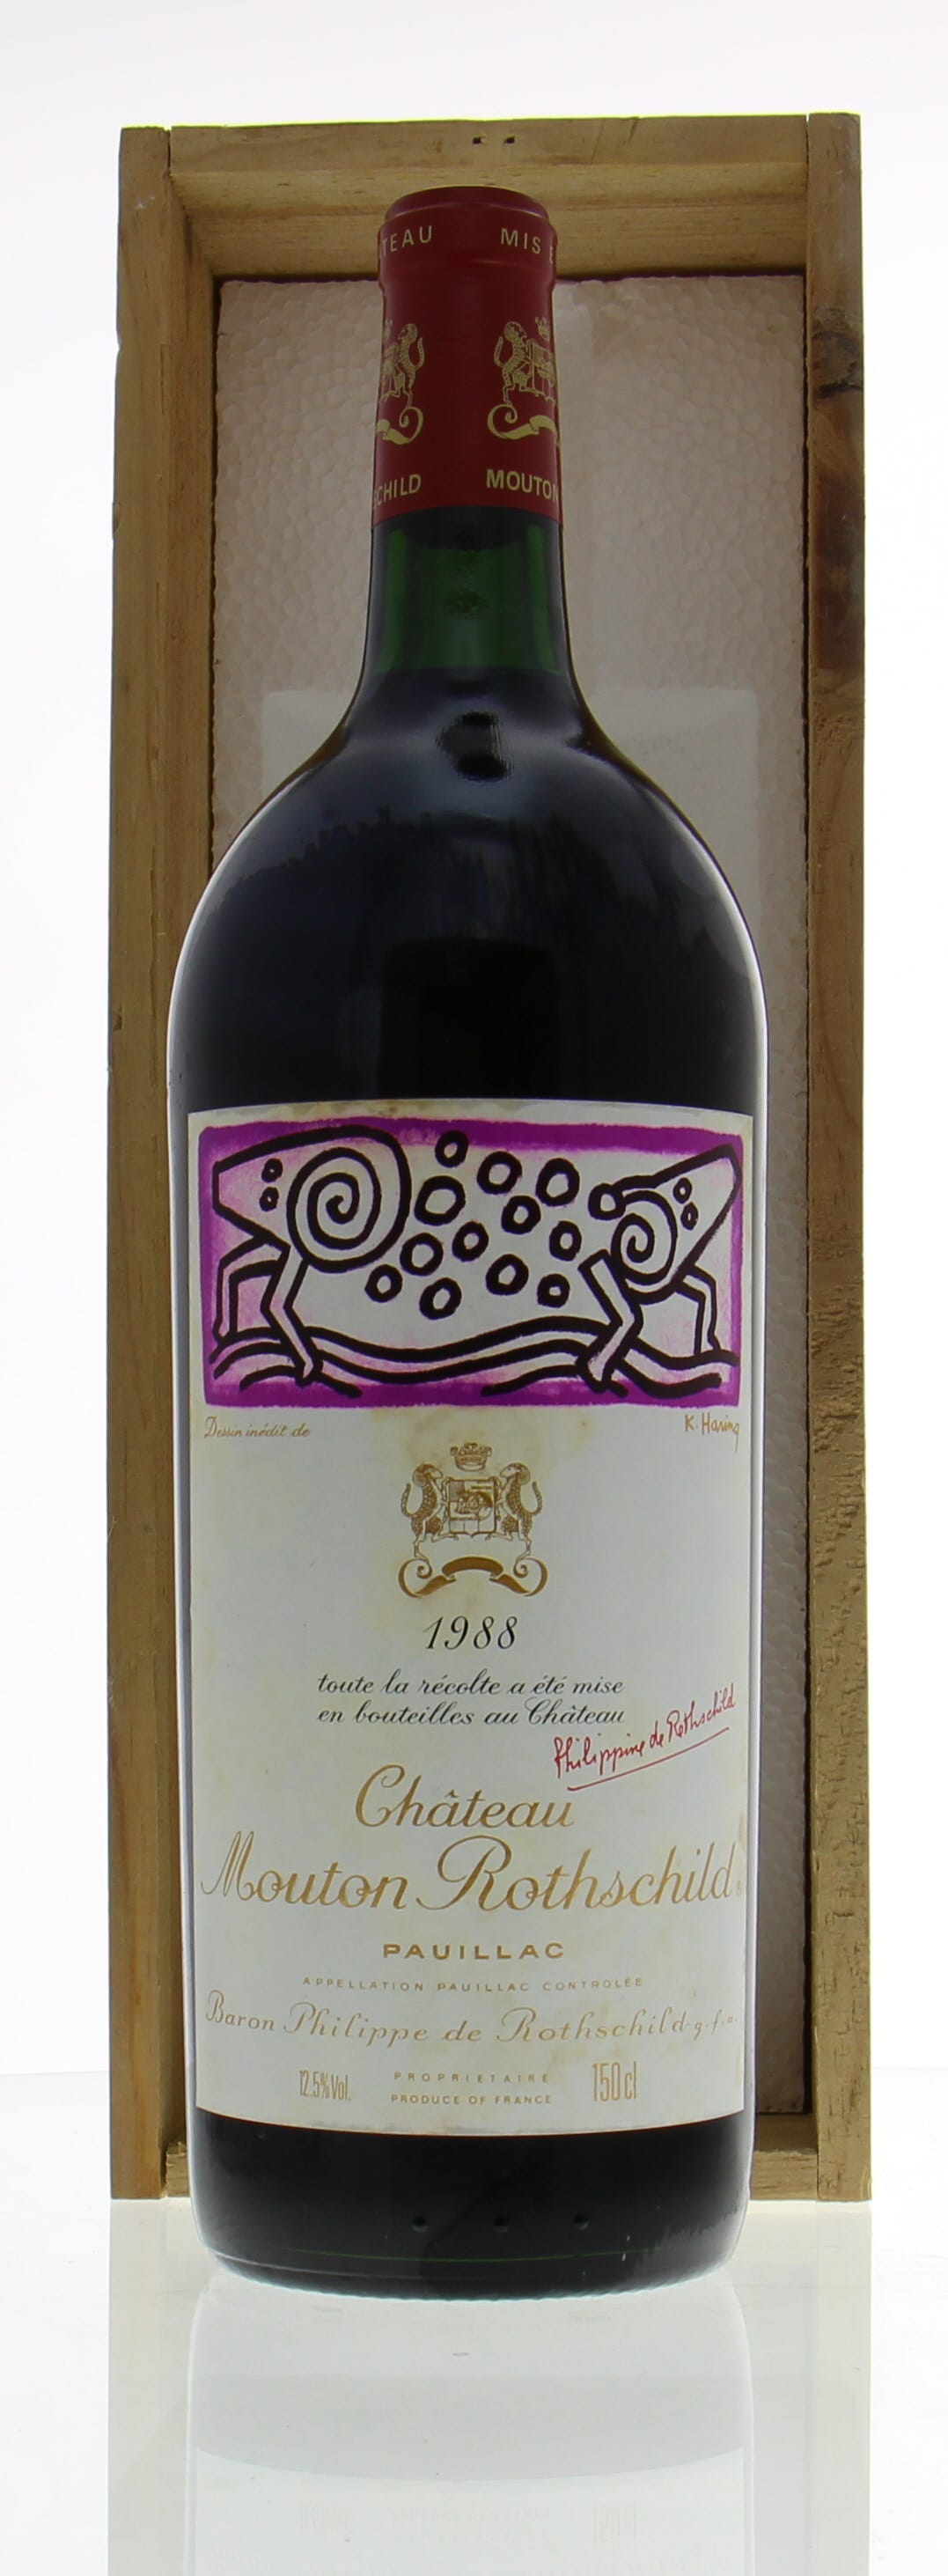 Chateau Mouton Rothschild 1988 | Buy Online | Best of Wines